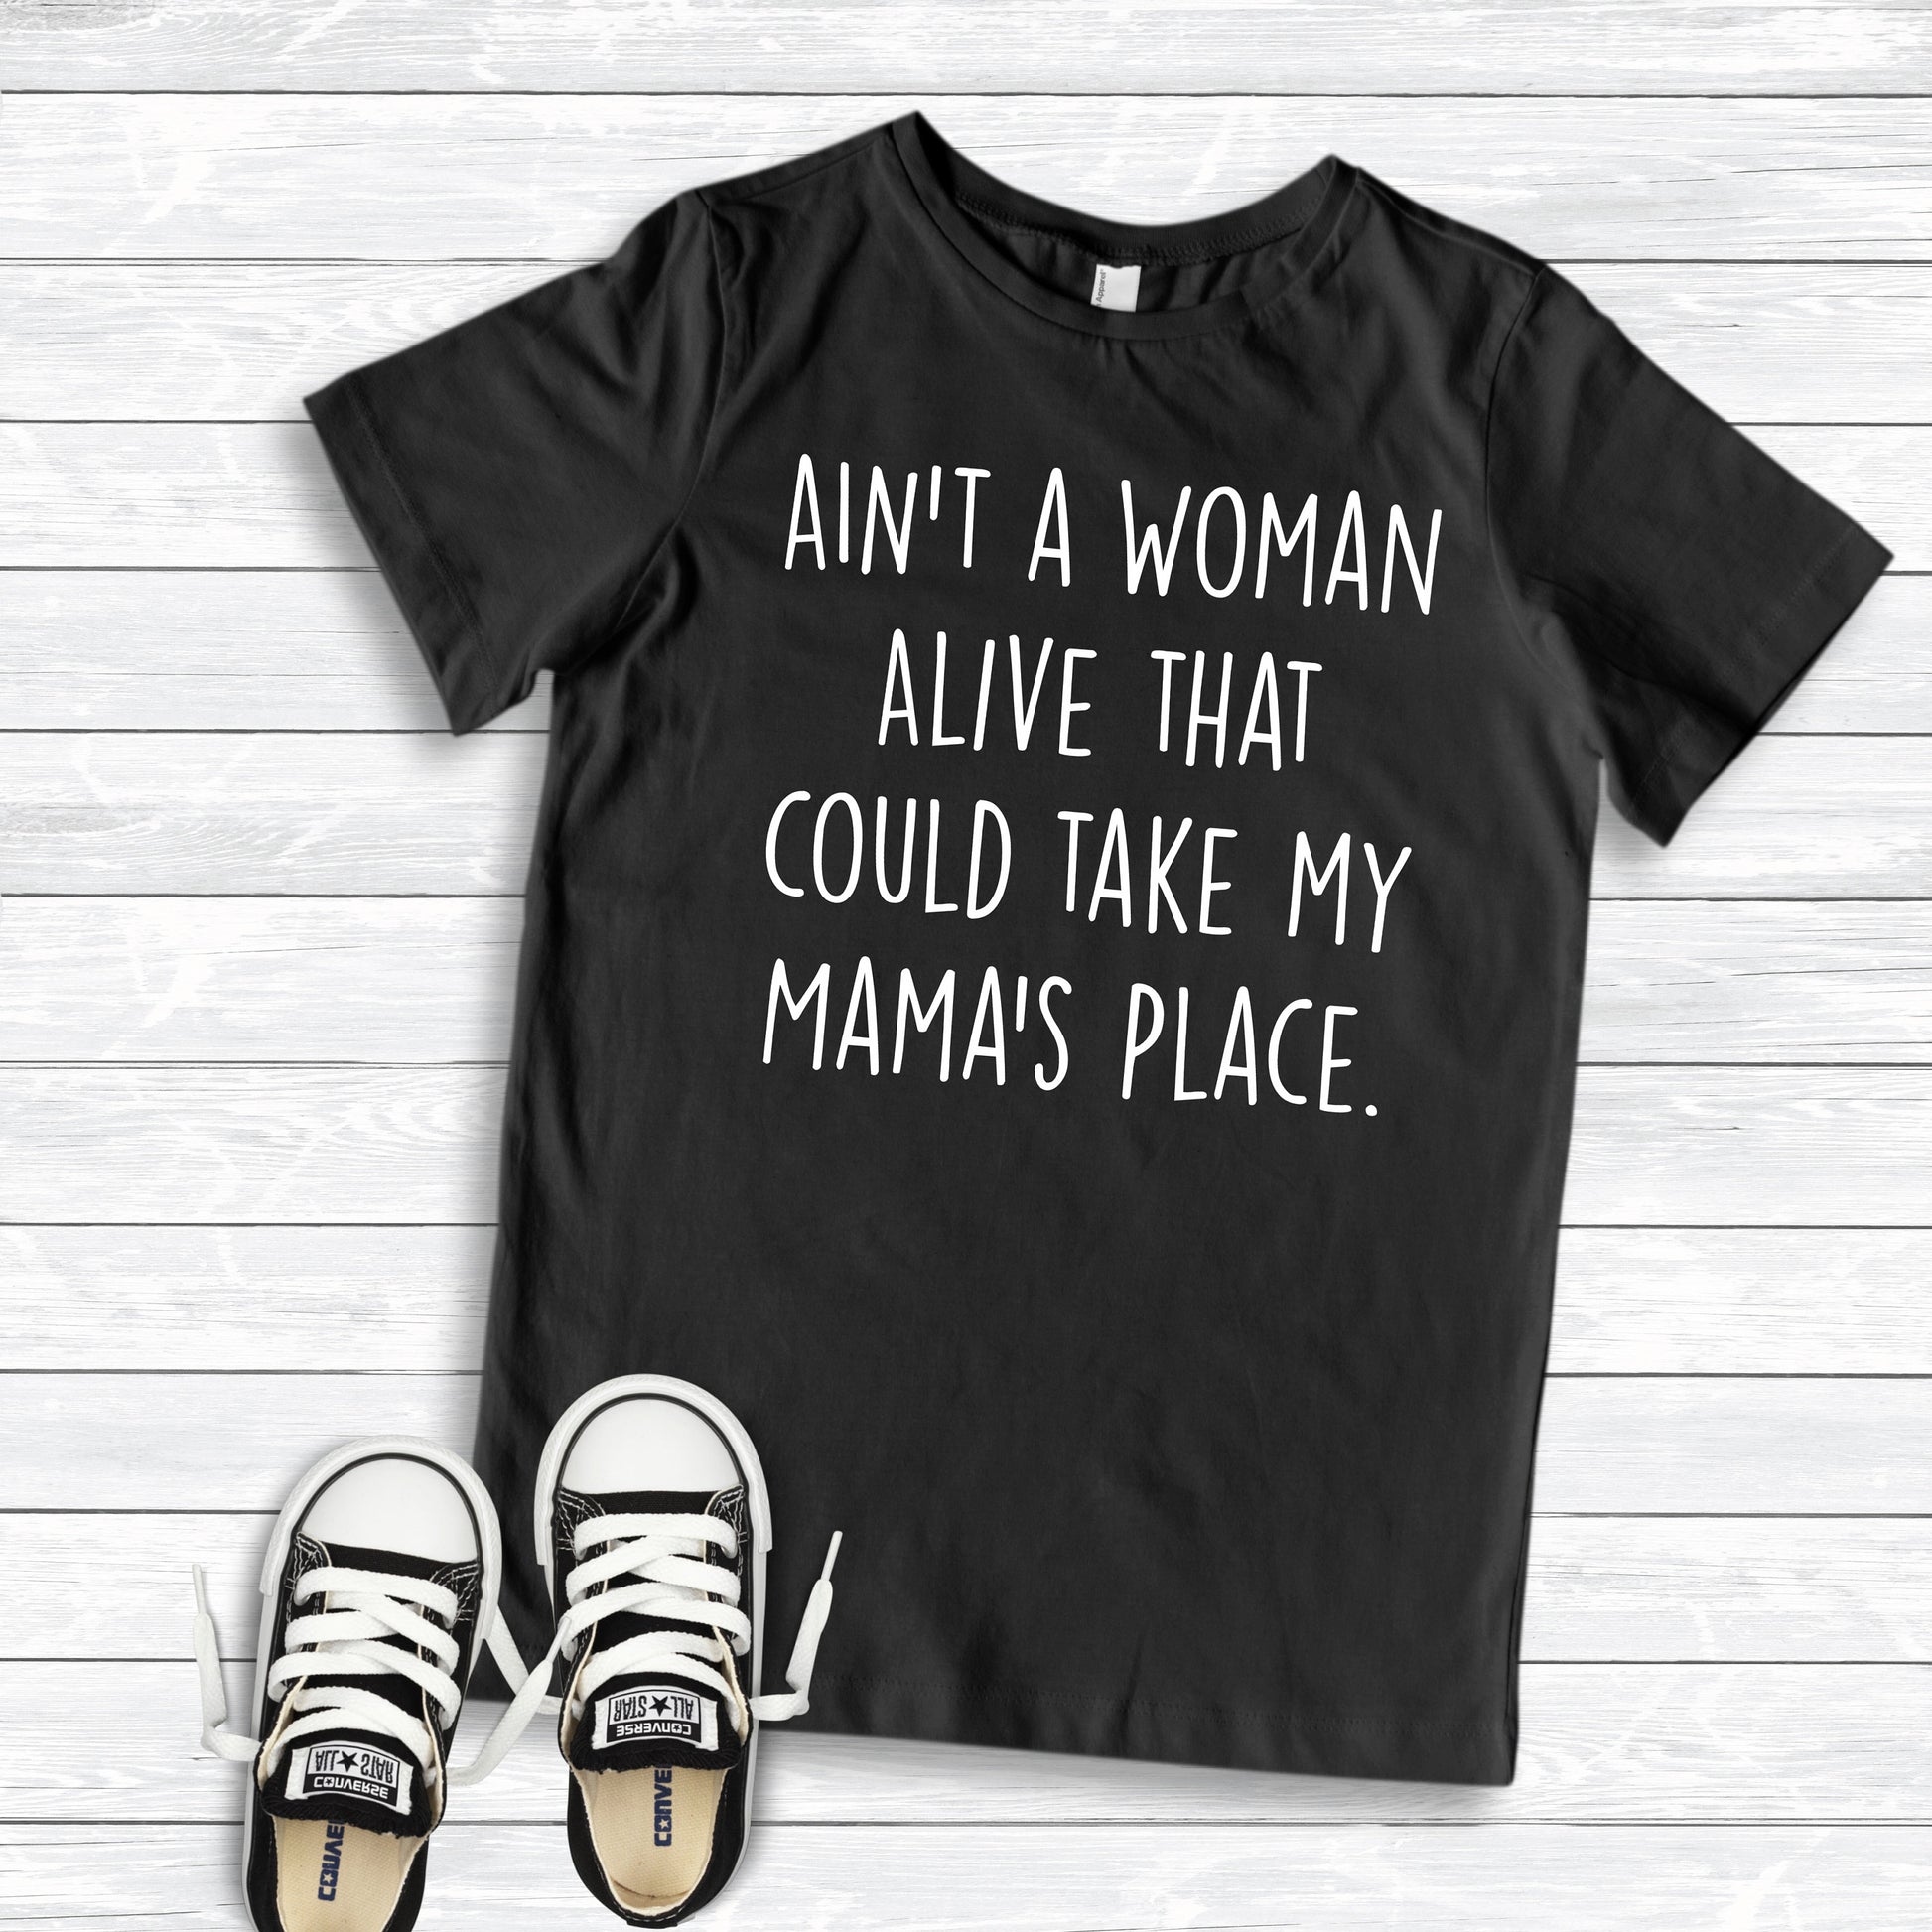 Ain't a Woman Alive that could Take My Mama's Place Infant or Toddler Shirt or Bodysuit - Cute Toddler Shirt - mama's boy shirt - rap shirt